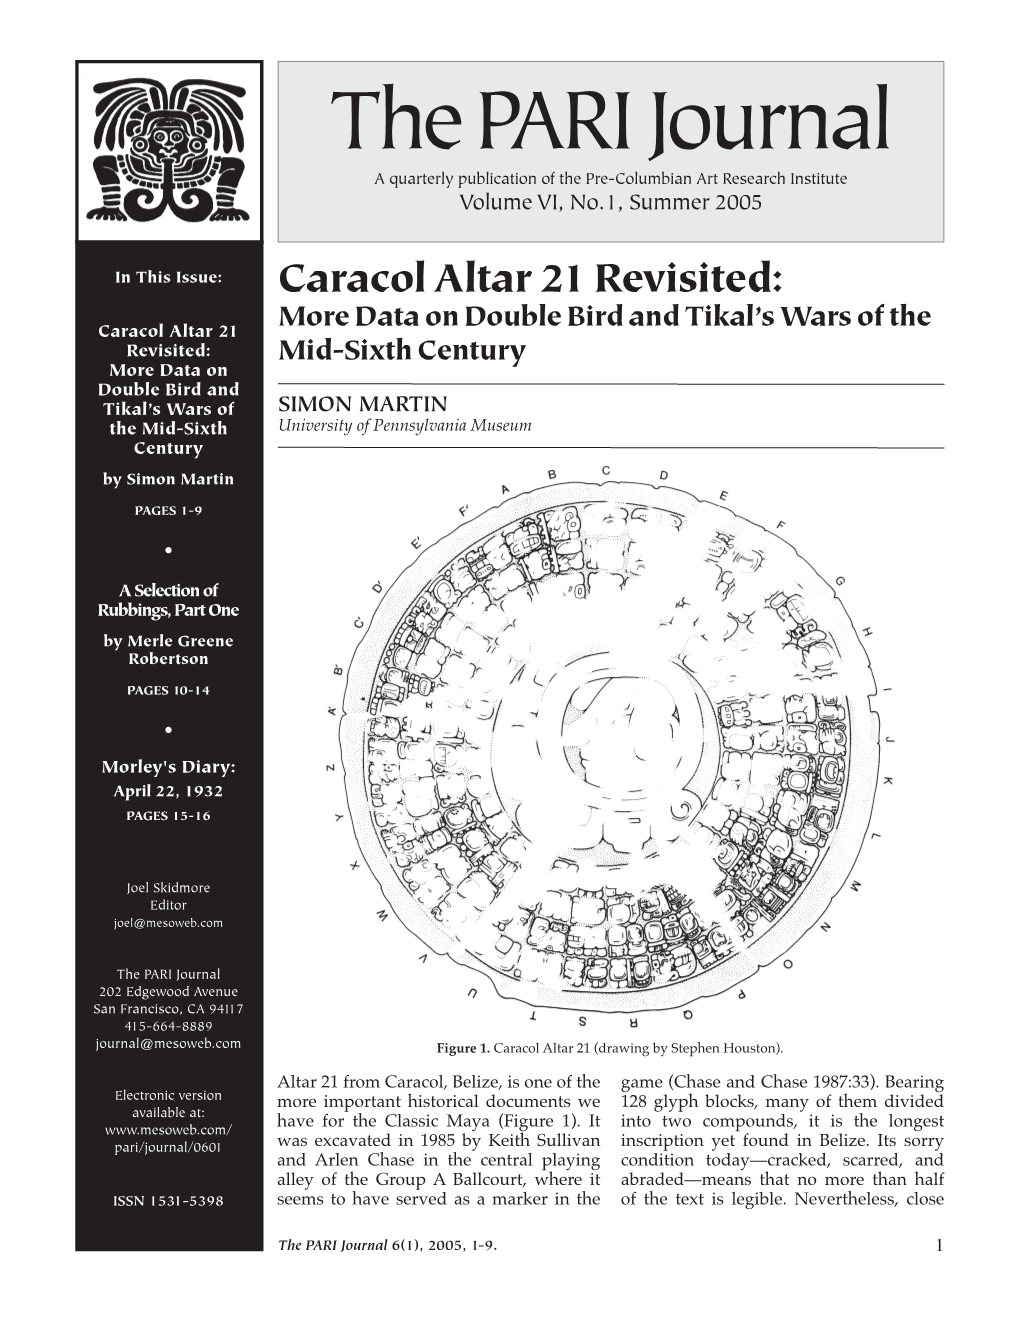 Caracol Altar 21 Revisited